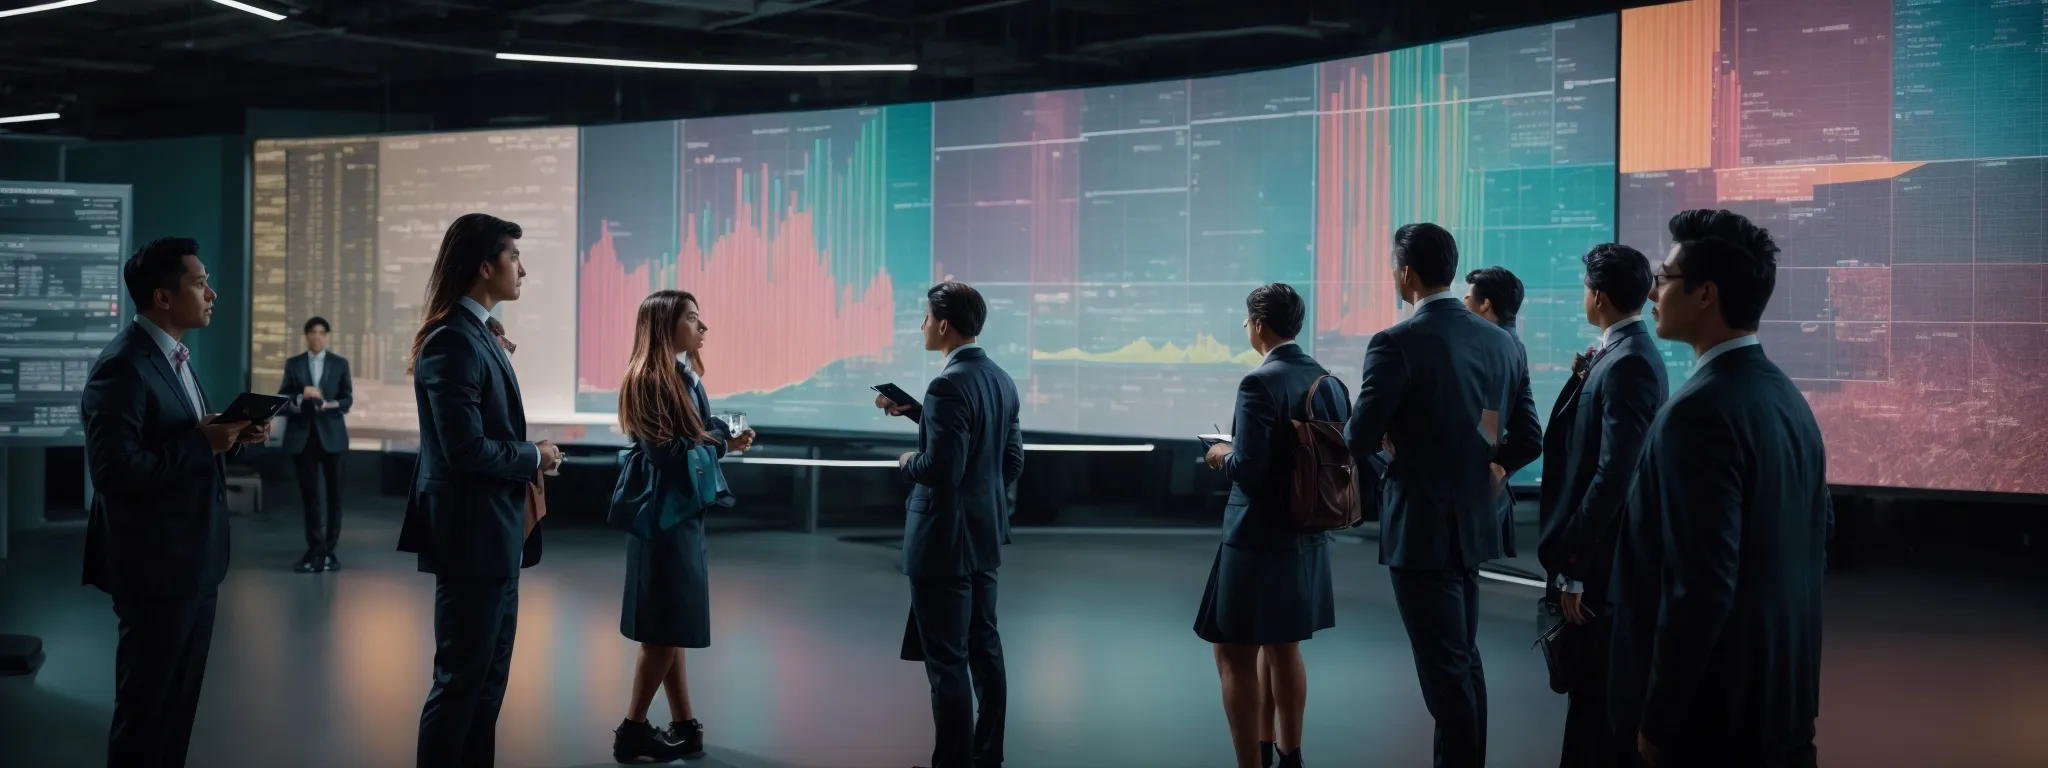 professionals gathered around a large screen displaying colorful analytics graphs while discussing marketing strategies.